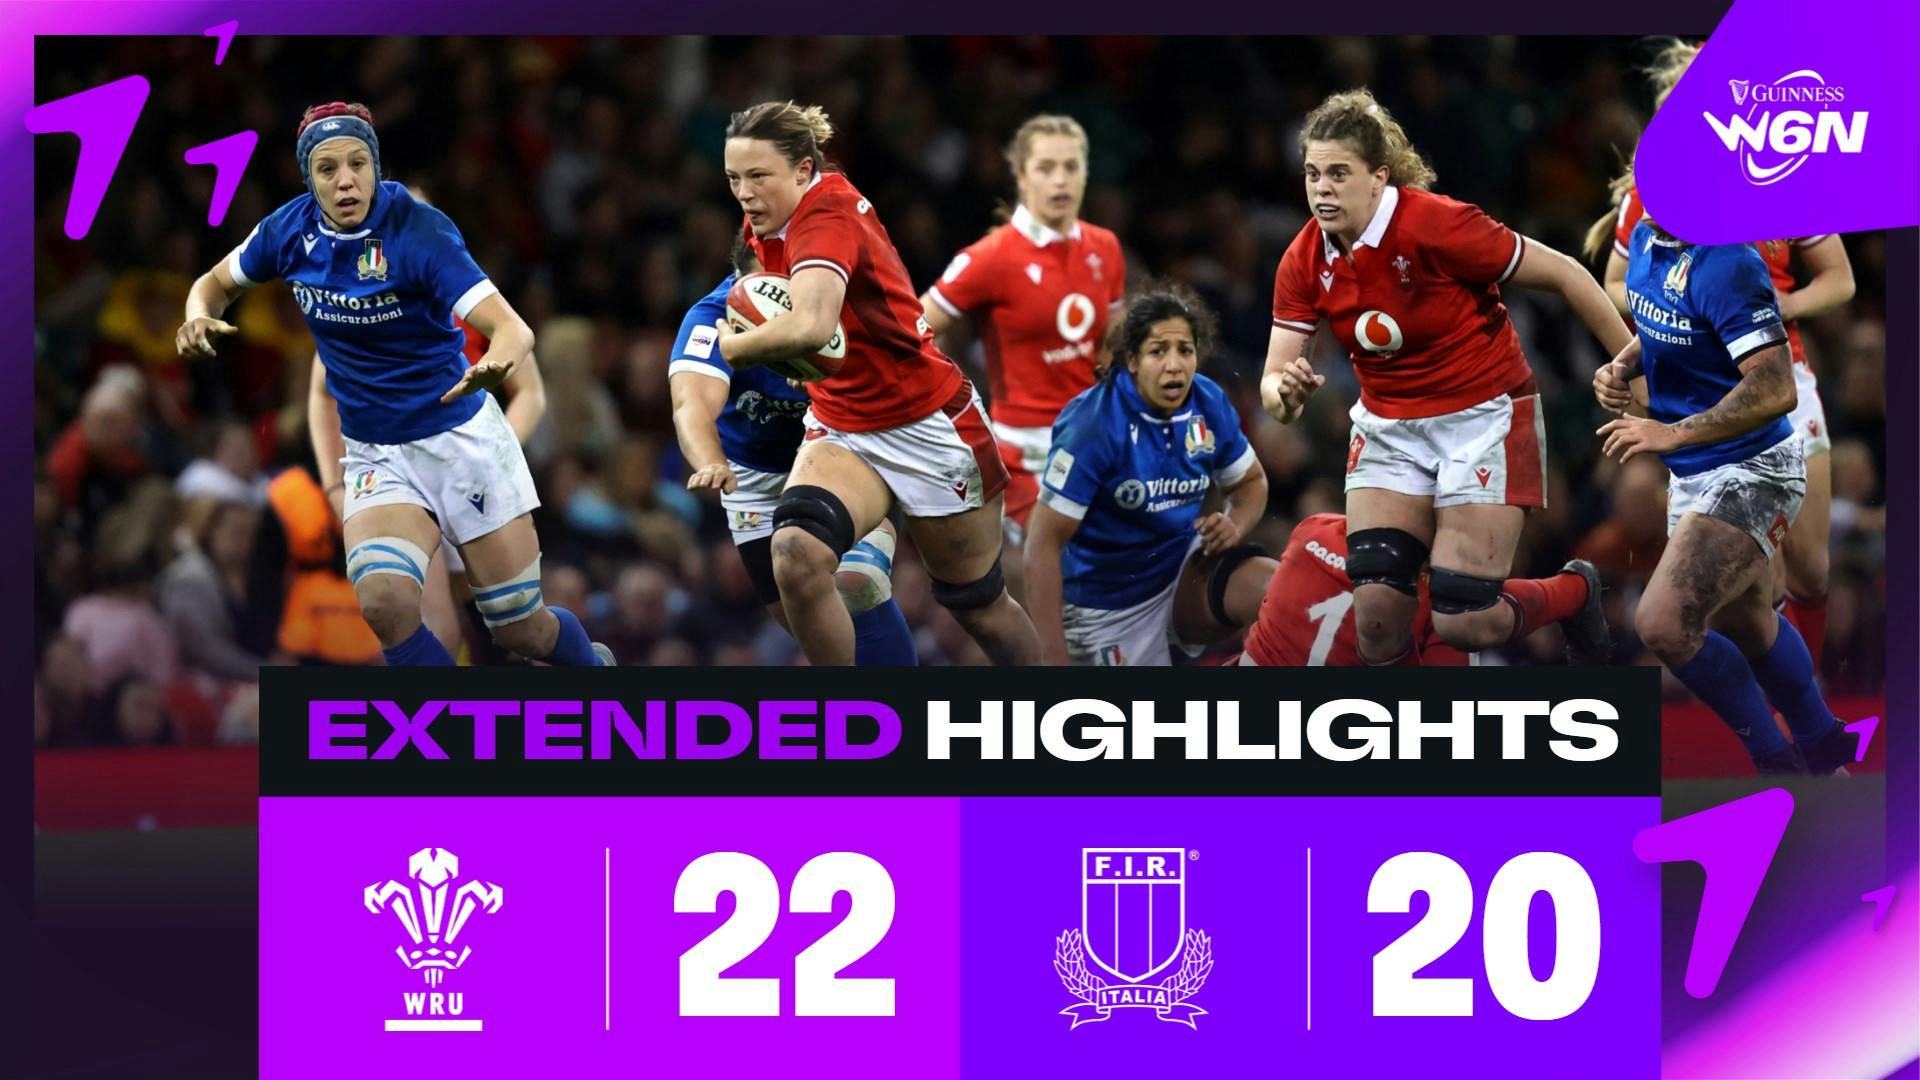 EXTENDED HIGHLIGHTS | GUINNESS WOMEN'S SIX NATIONS | WALES V ITALY